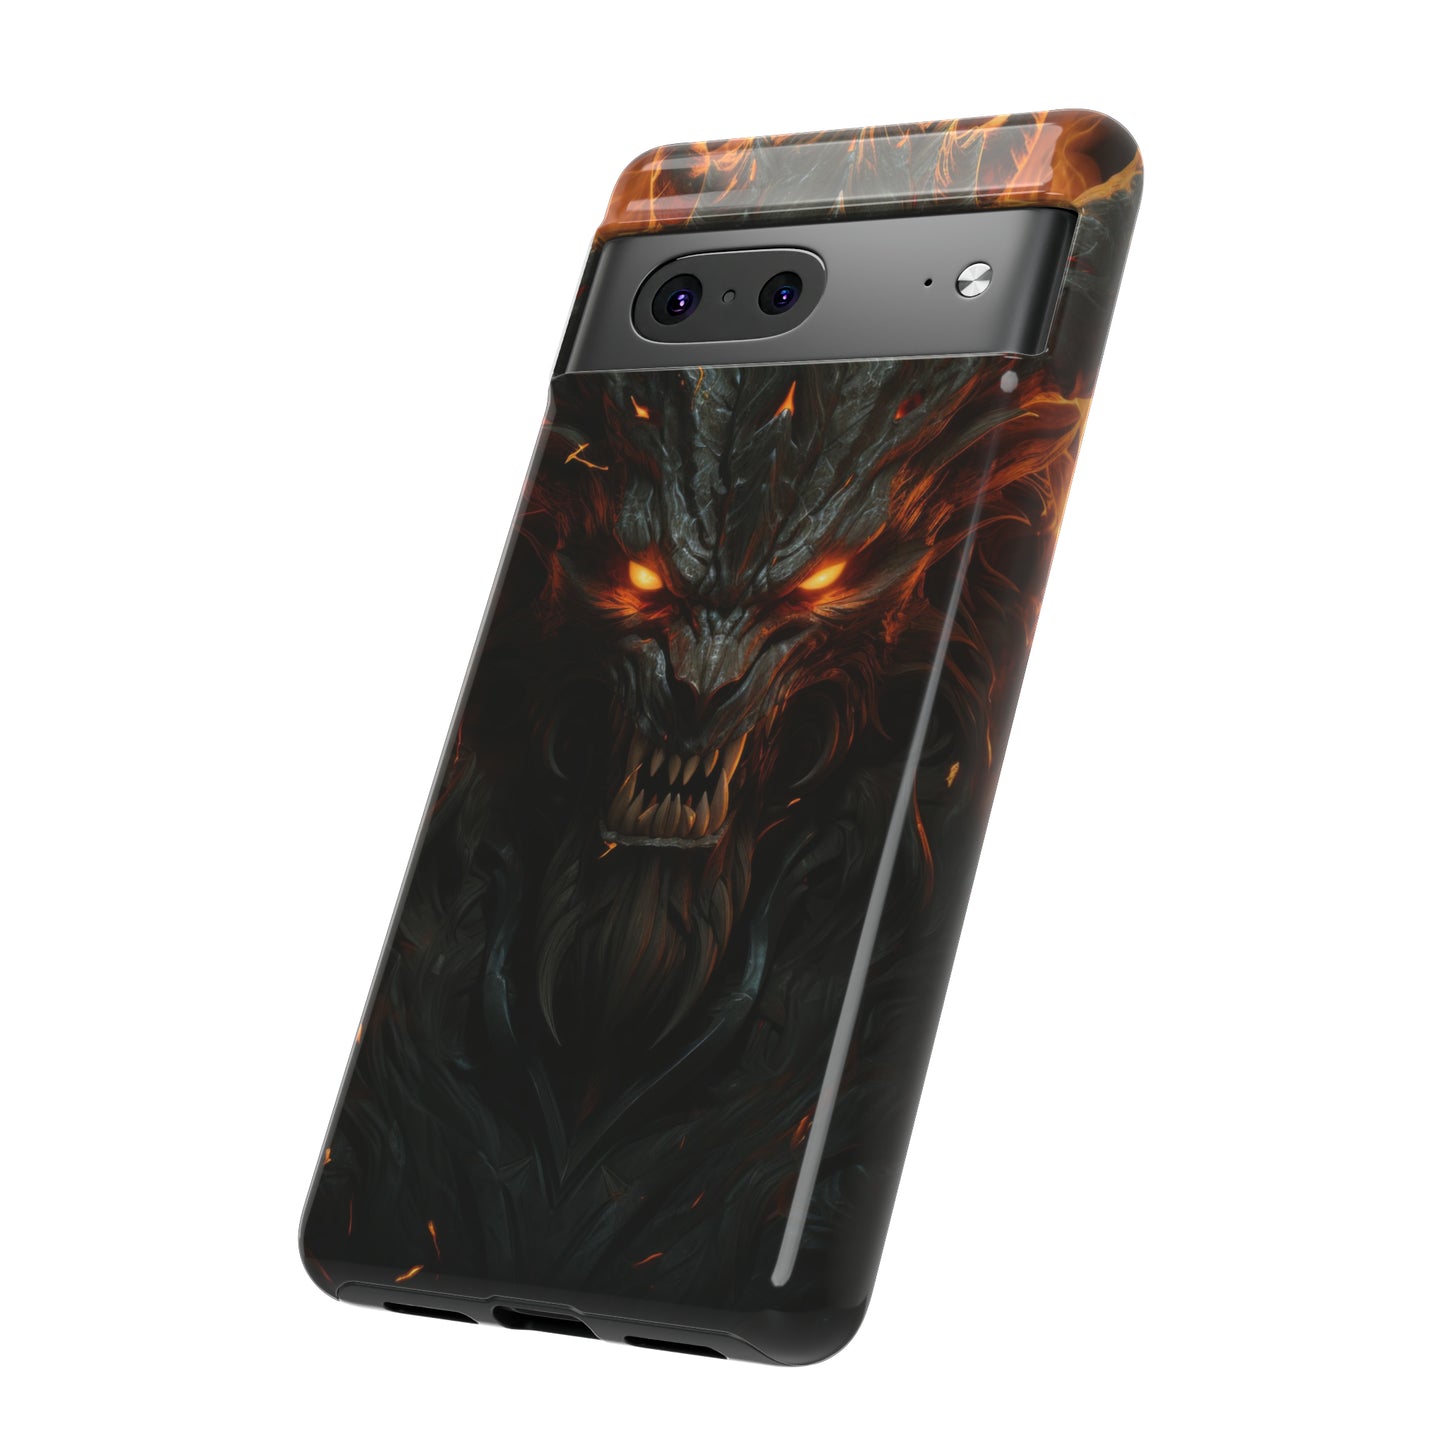 Flaming Stone Lion Warrior Protective Phone Case - Fiery Roar Design for iPhone, Samsung, Pixel